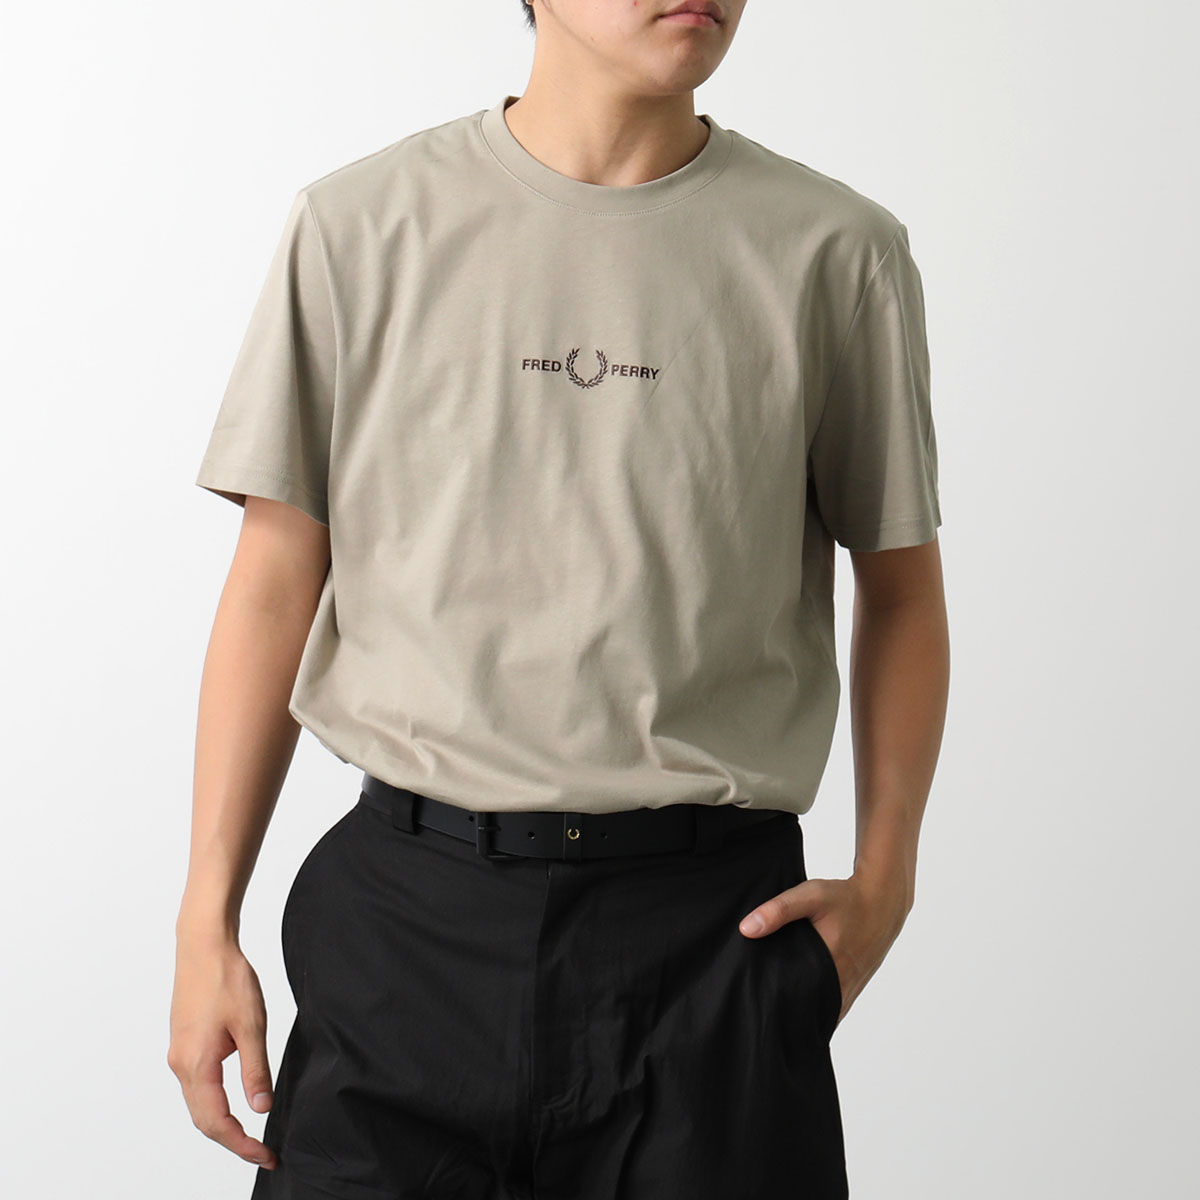 FRED PERRY Tシャツ EMBROIDERED T-SHIRT M4580 レディース ロゴ...